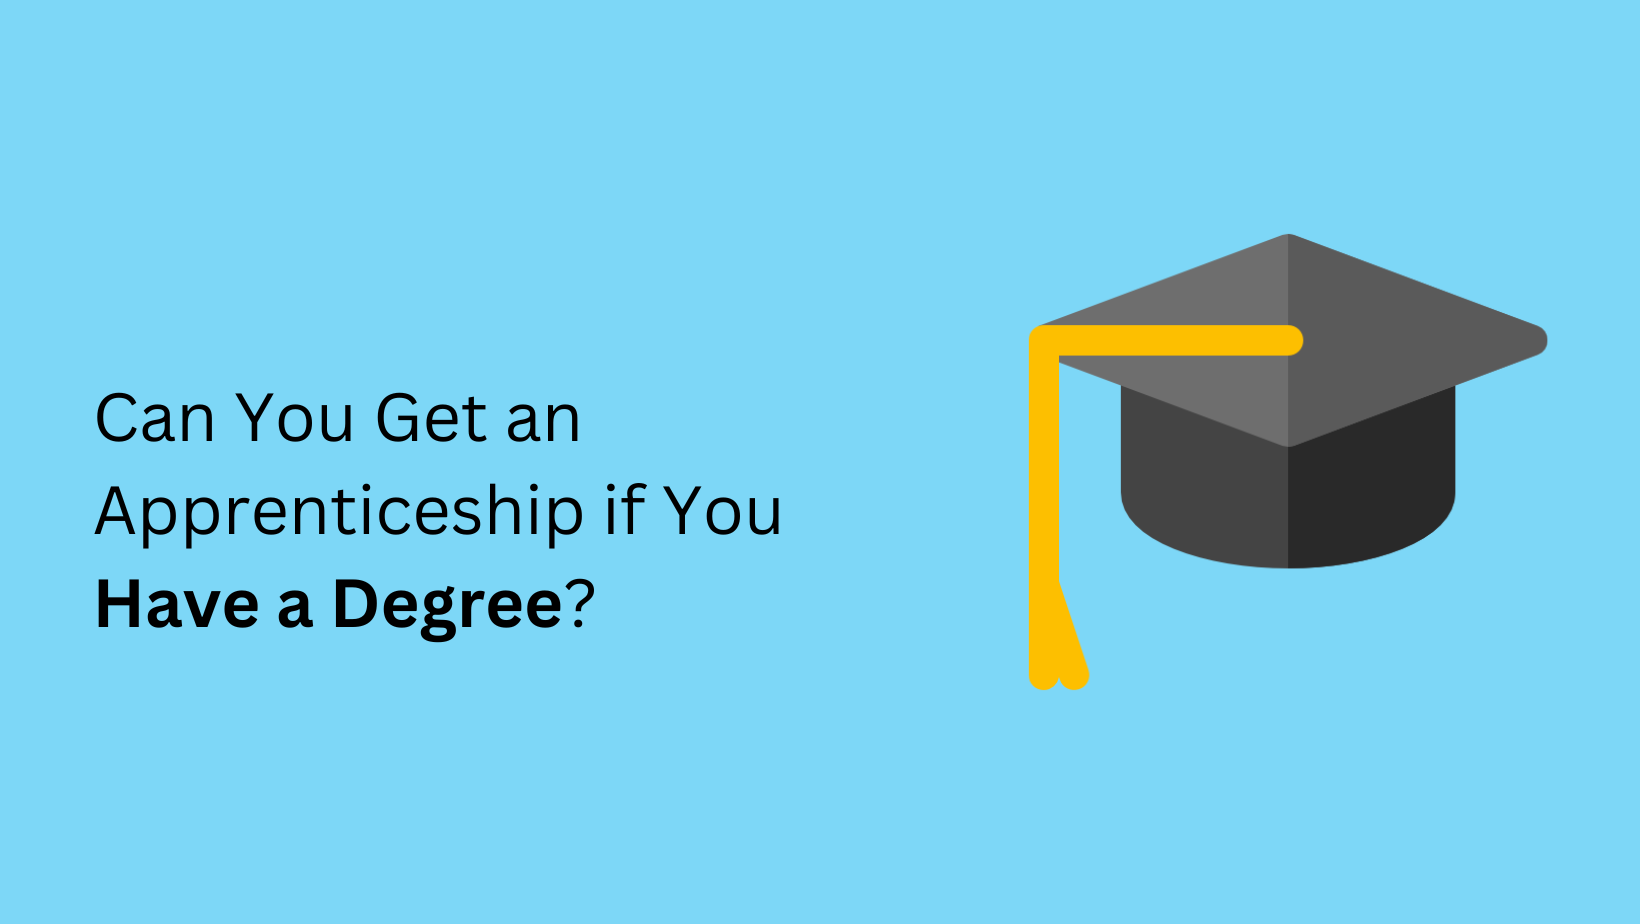 Can You Get an Apprenticeship if You Have a Degree